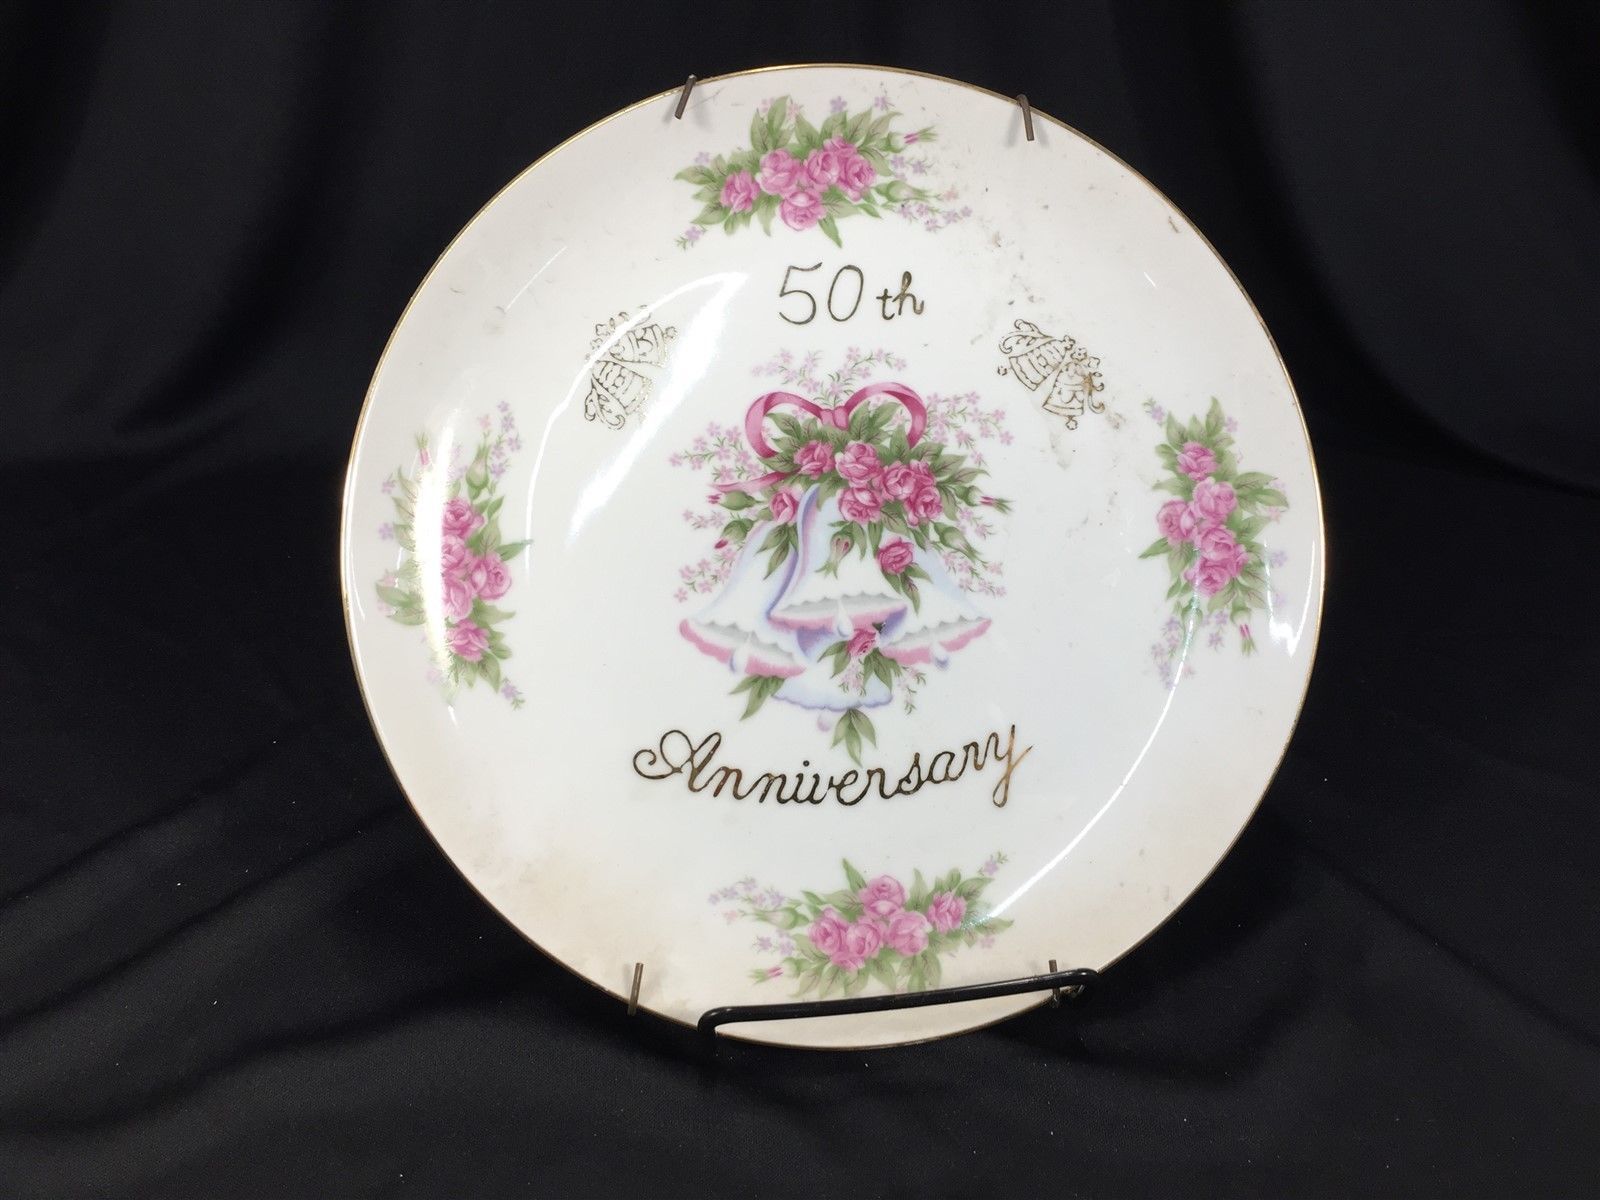 Primary image for Vintage 50th Anniversary Decorative Plate Wall Hanger Roses Bells Made in Japan